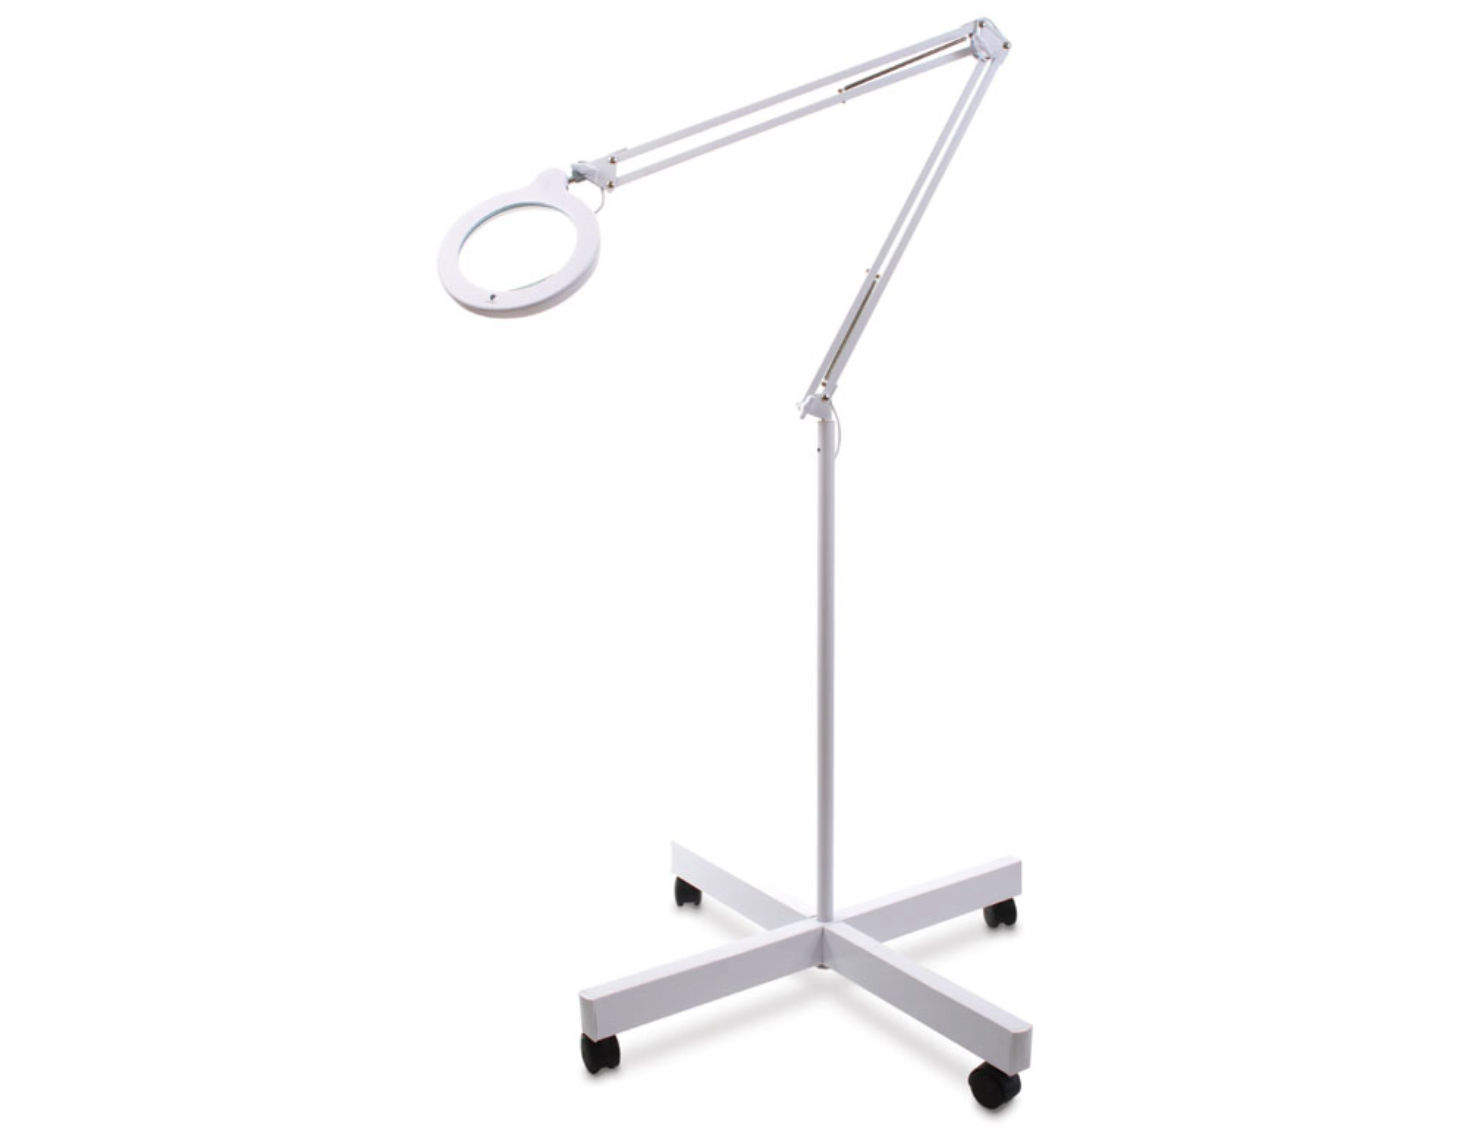 Daylight LED Mag Lamp and Stand